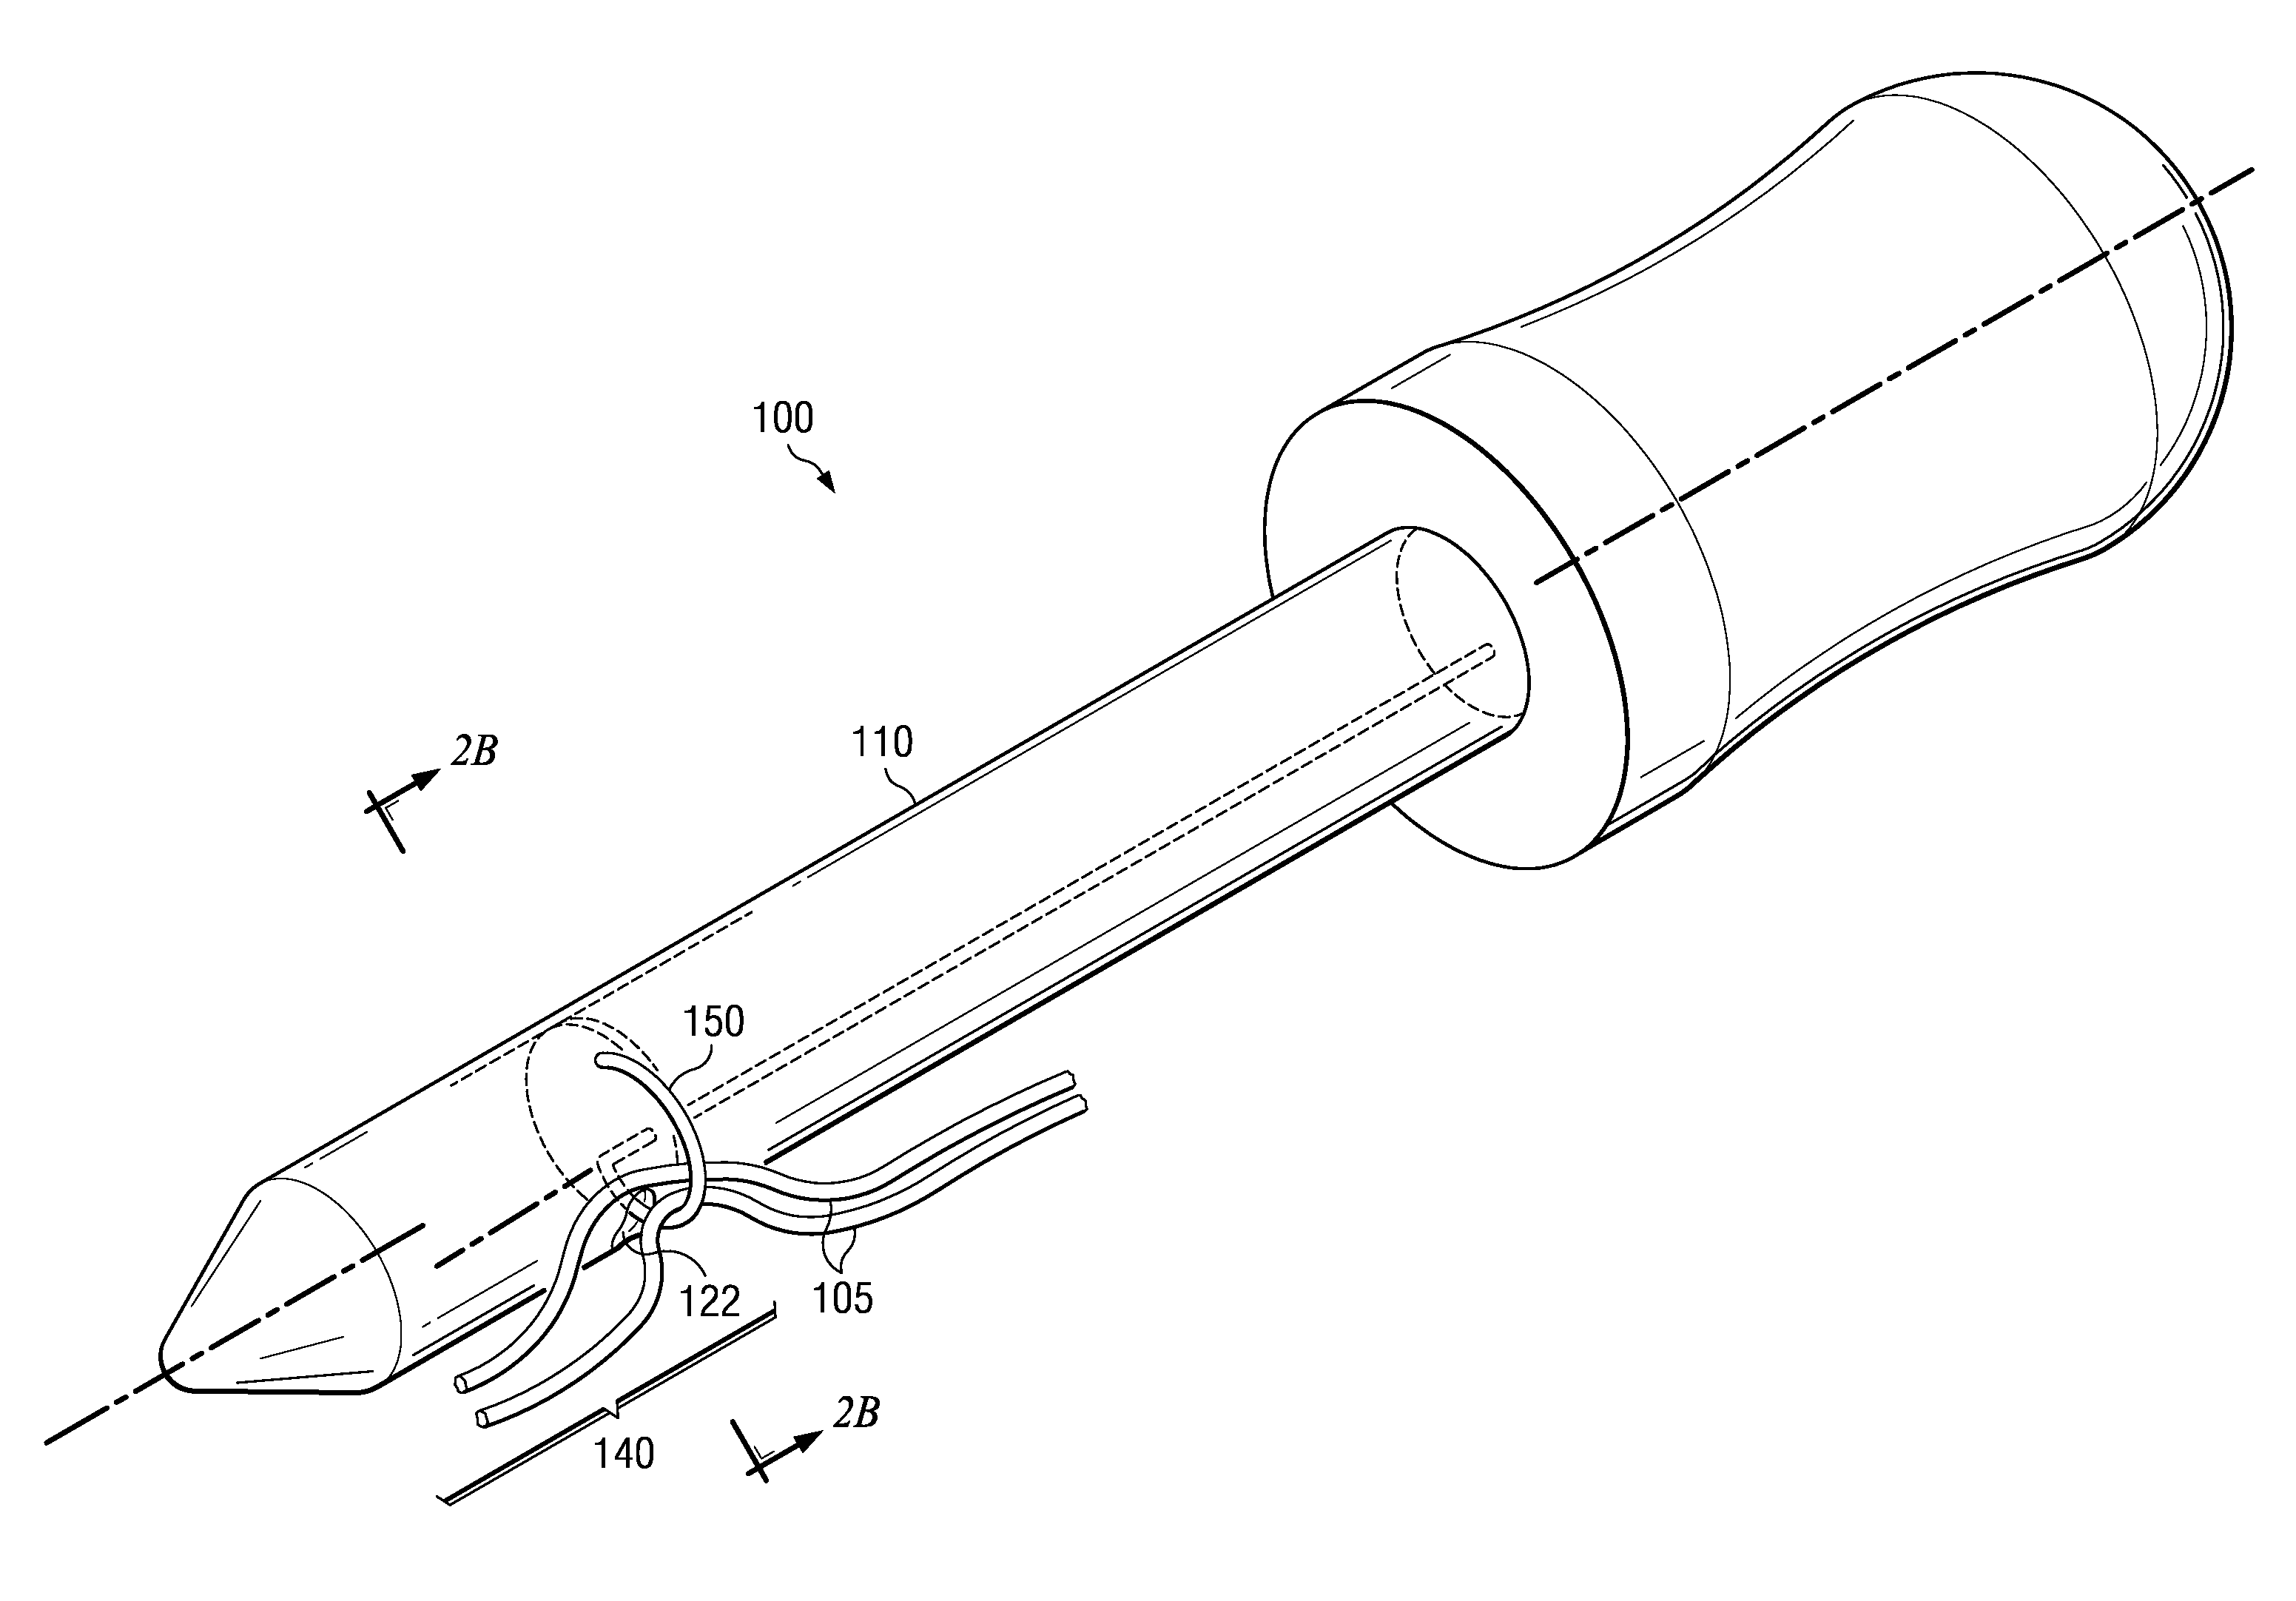 Surgical instrument for manipulating surgical suture and methods of use